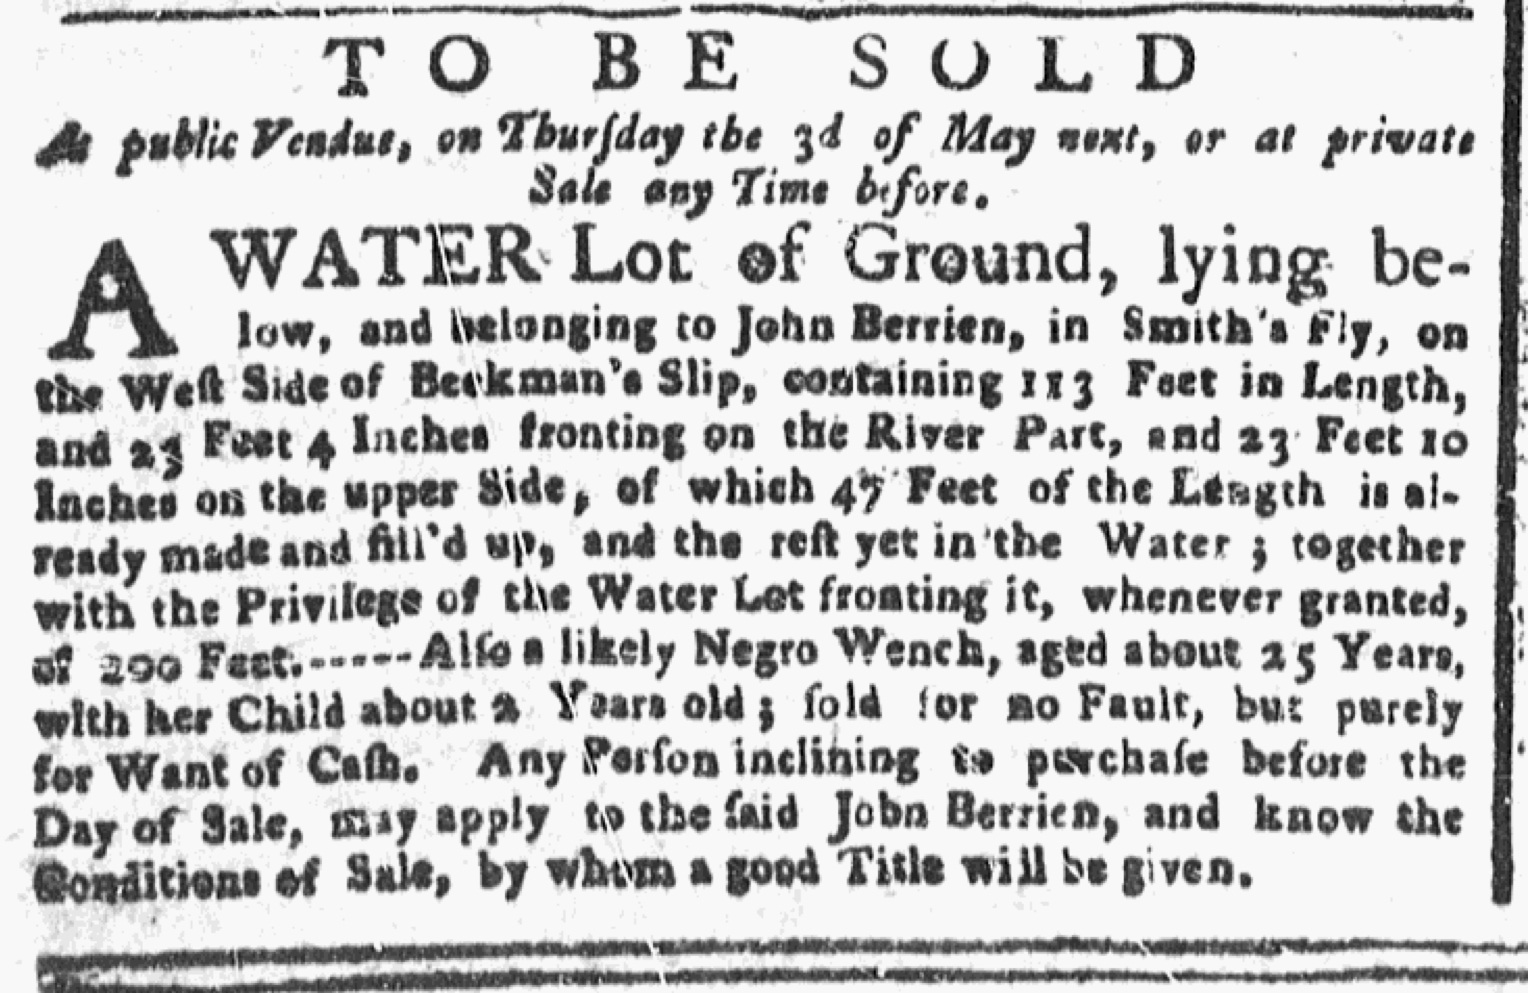 Slavery Advertisements Published April 2 1770 The Adverts 250 Project